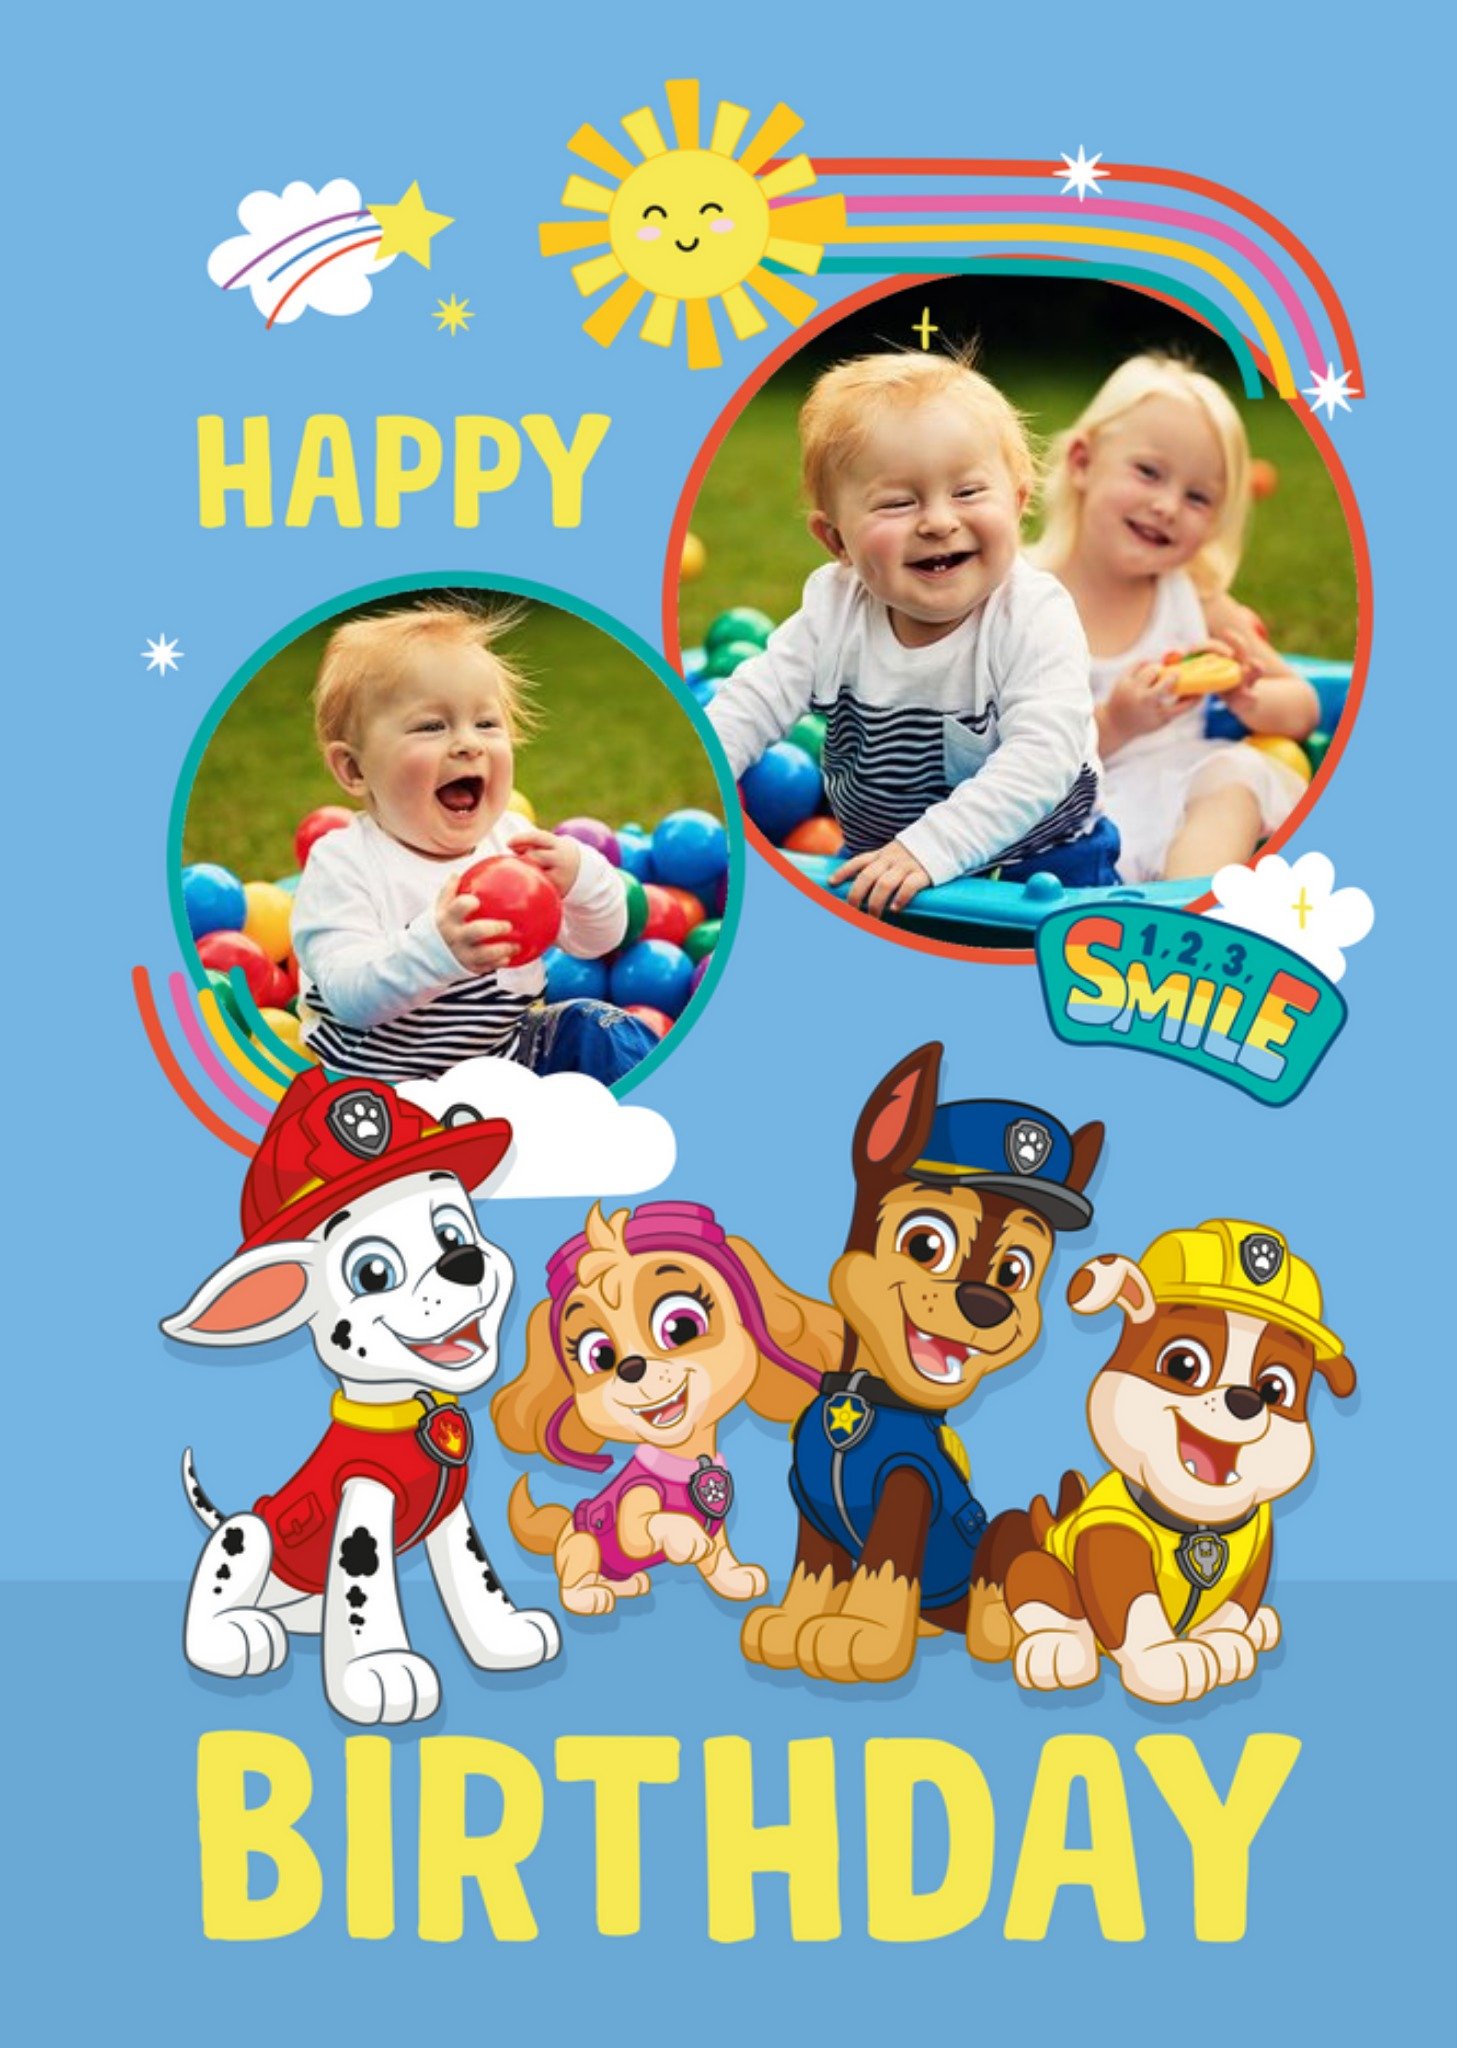 Paw Patrol Characters Photo Upload Birthday Card, Large